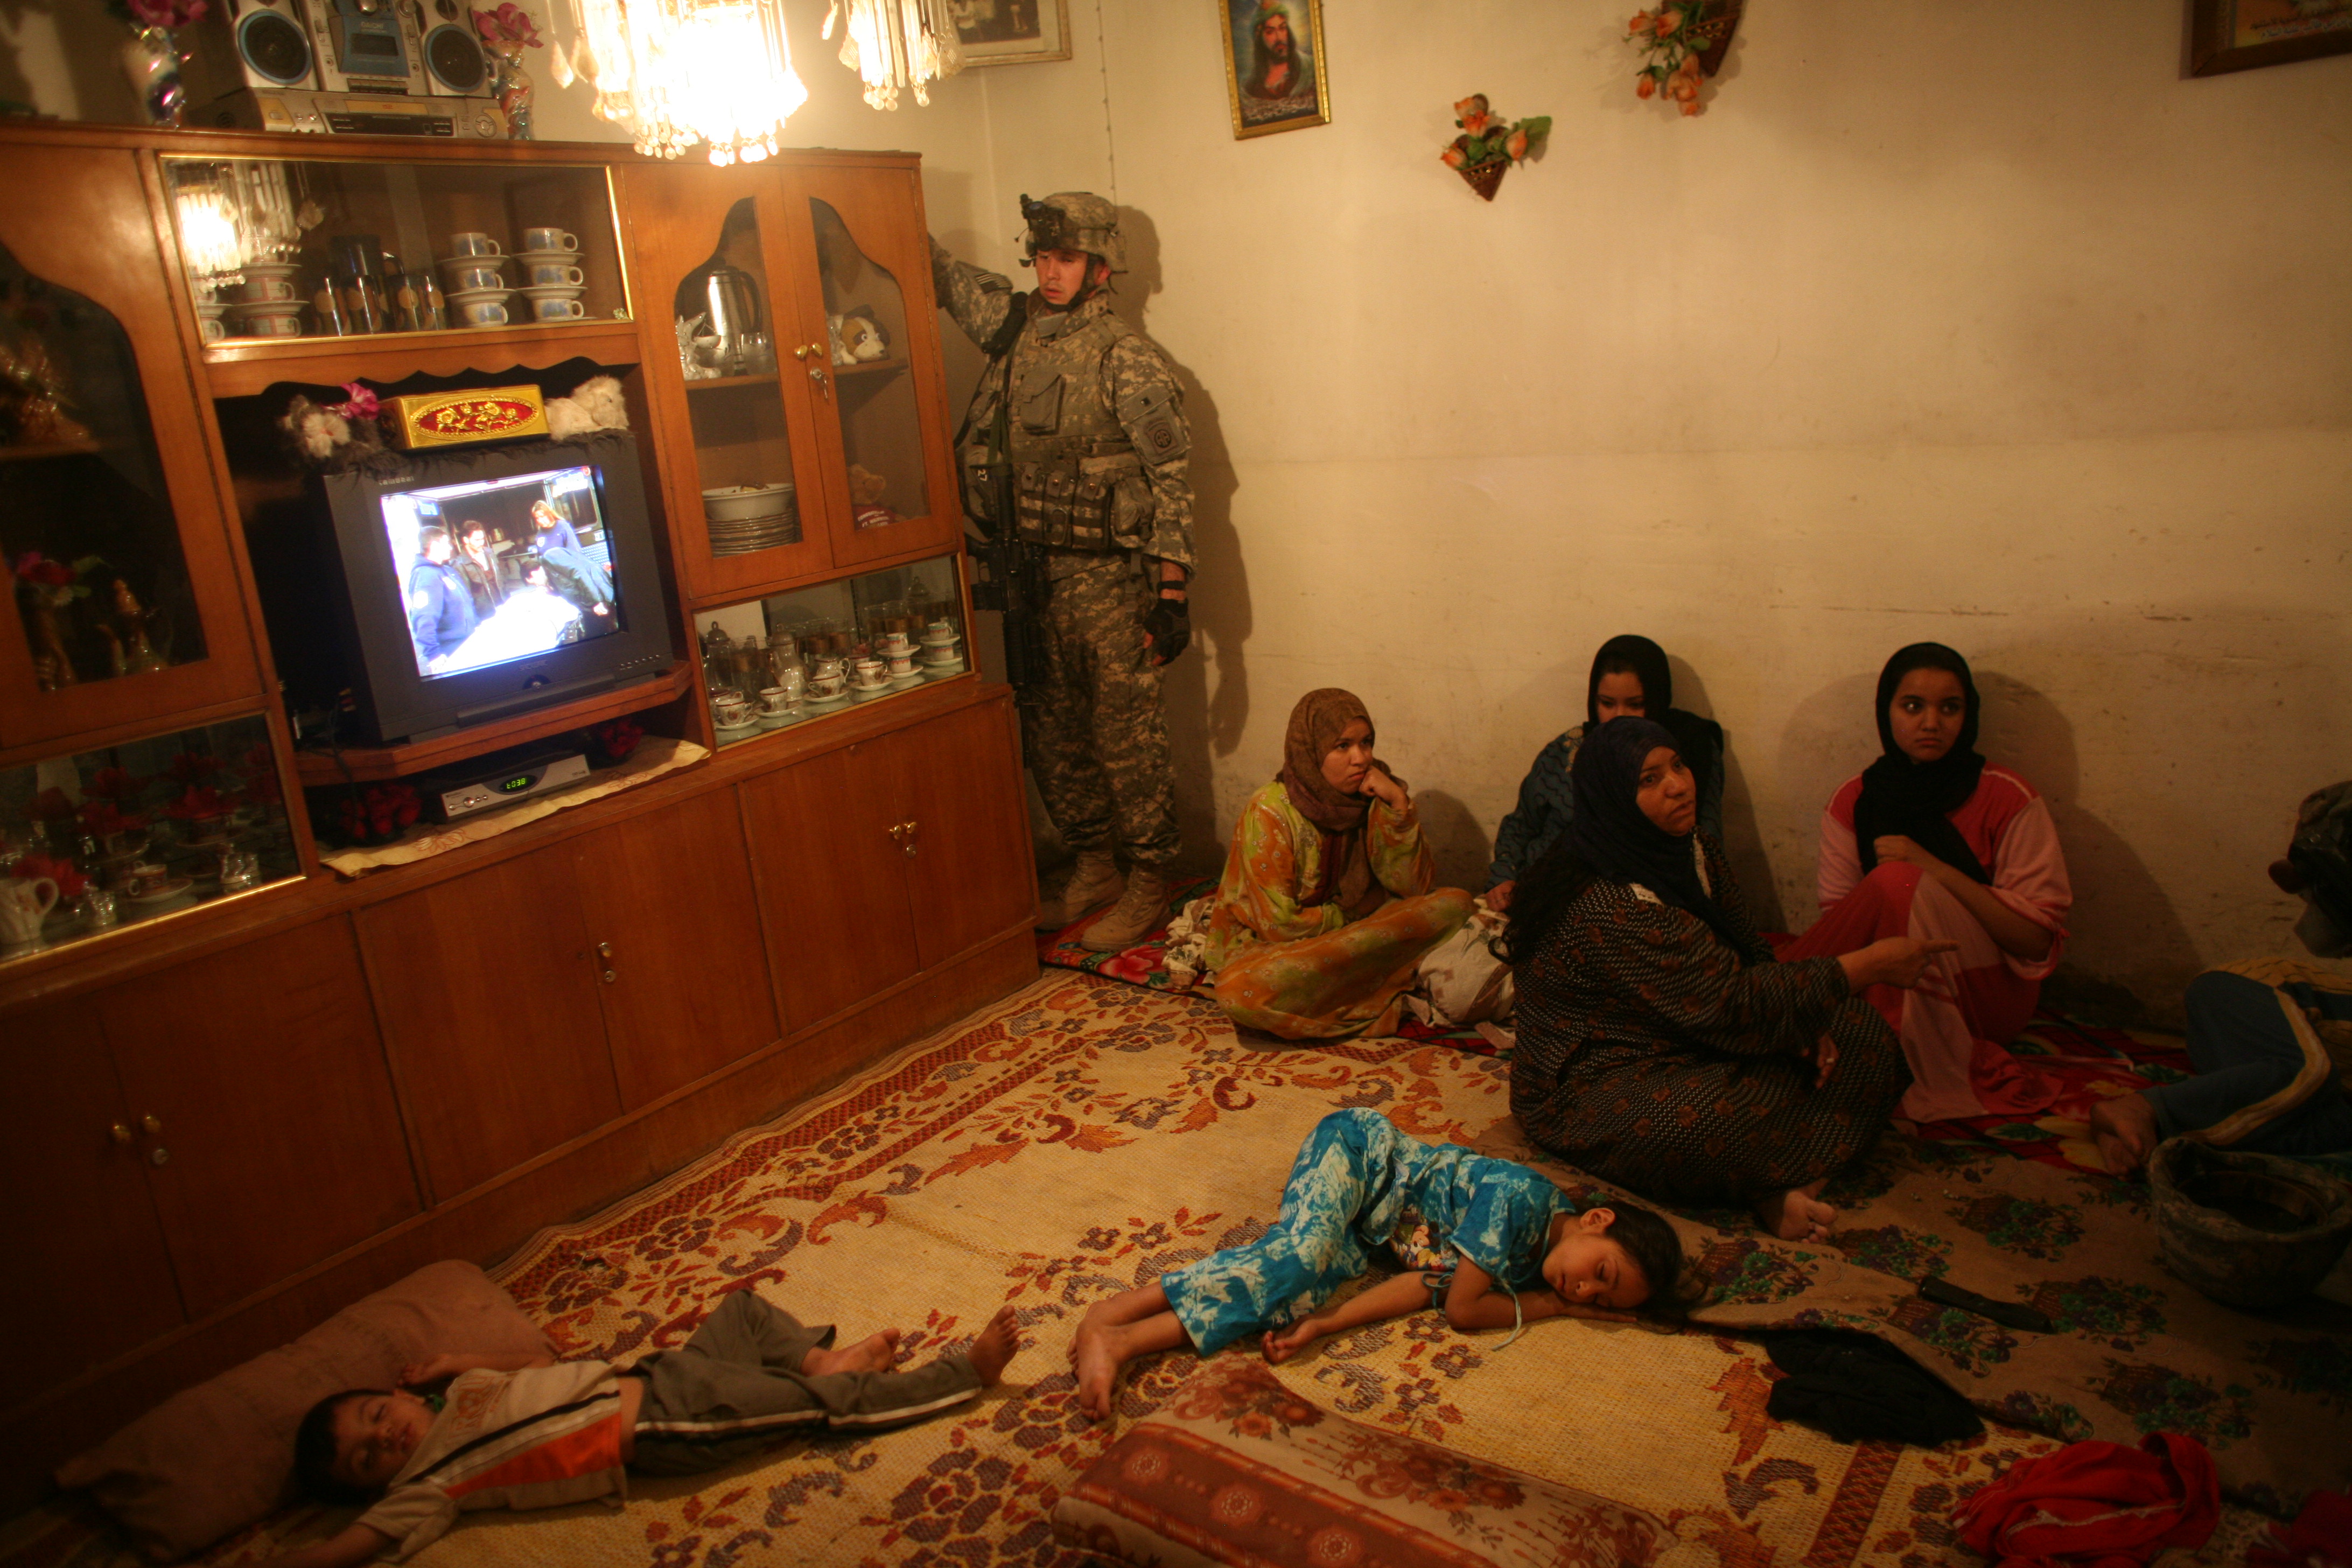 US soldiers search a home in a late-night raid as children lie asleep (photo: Michael Kamber) 